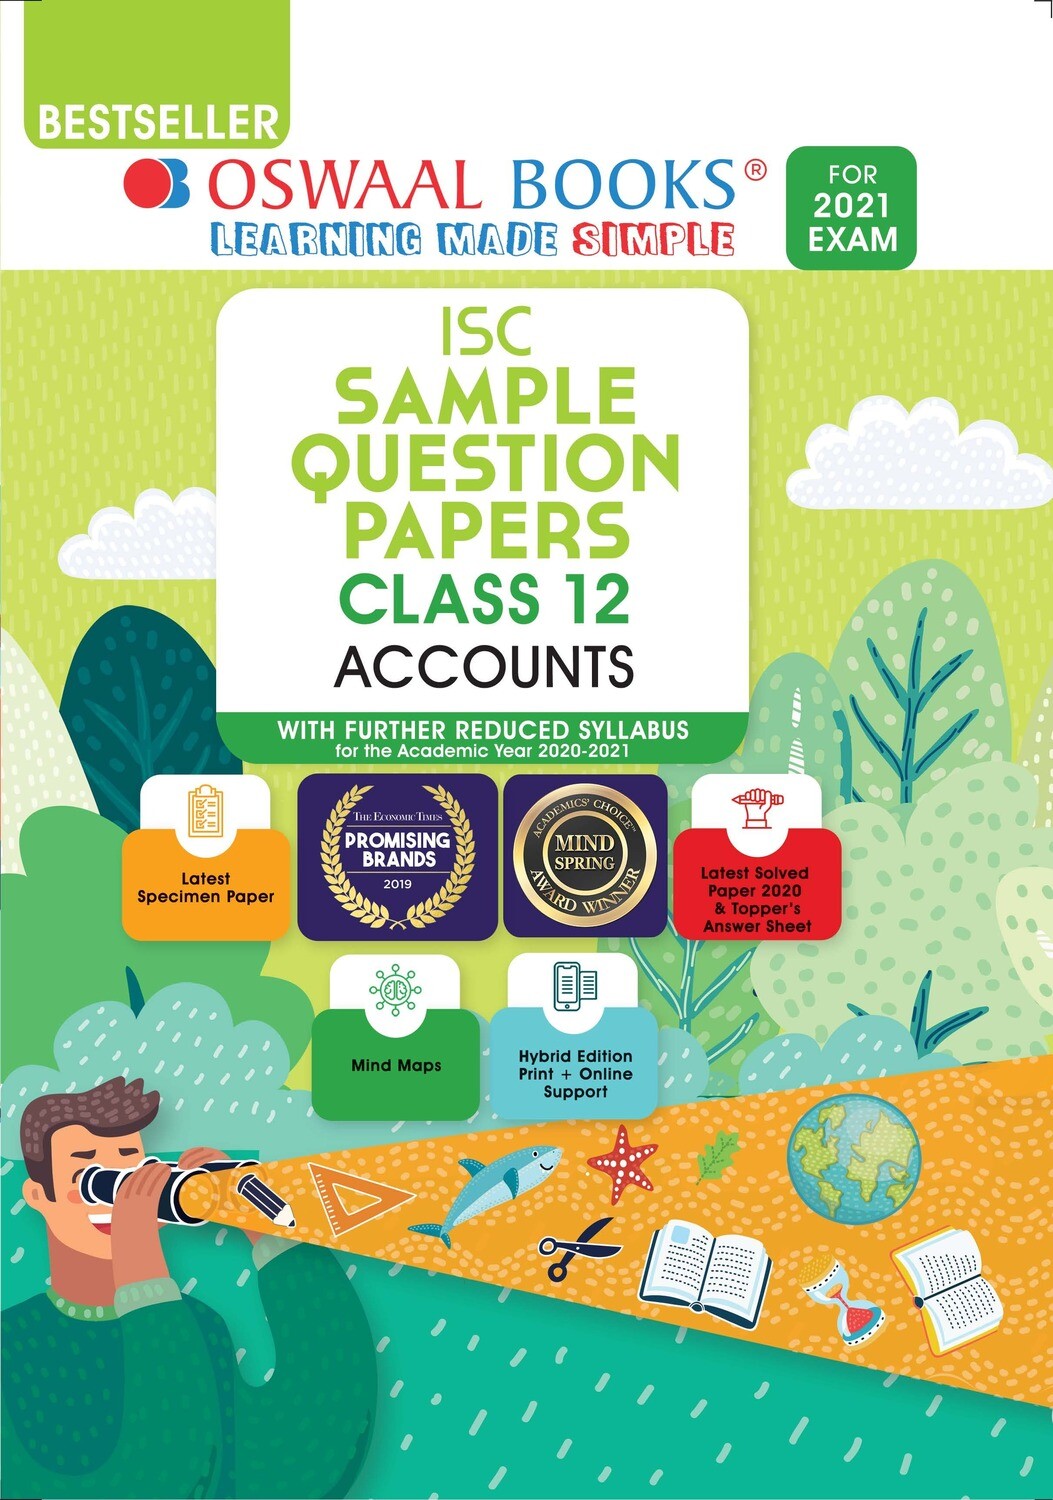 Buy e-book: Oswaal ISC Sample Question Papers Class 12 Accountancy (For 2021 Exam)